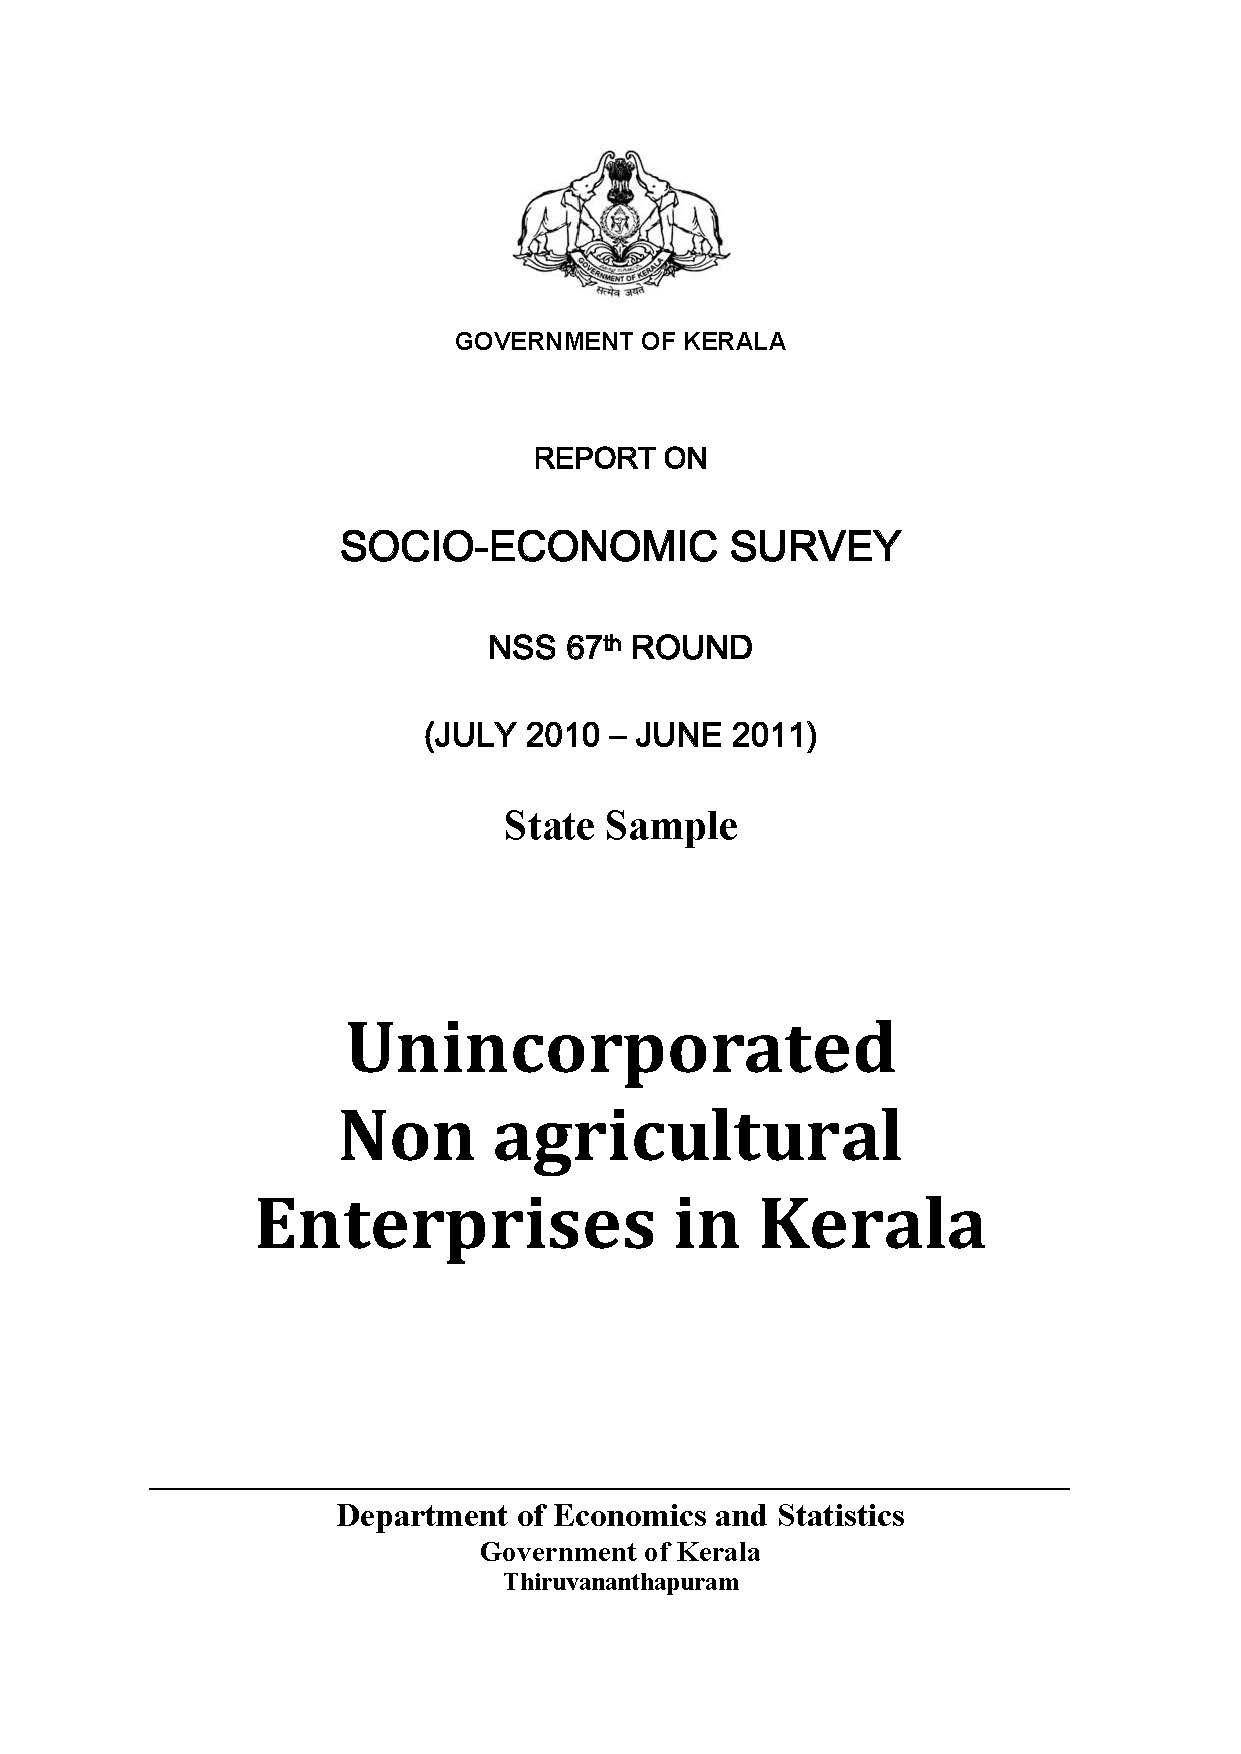 NSS 67th round - Unincorporated Non Agricultural Enterprises in Kerala - State Sample